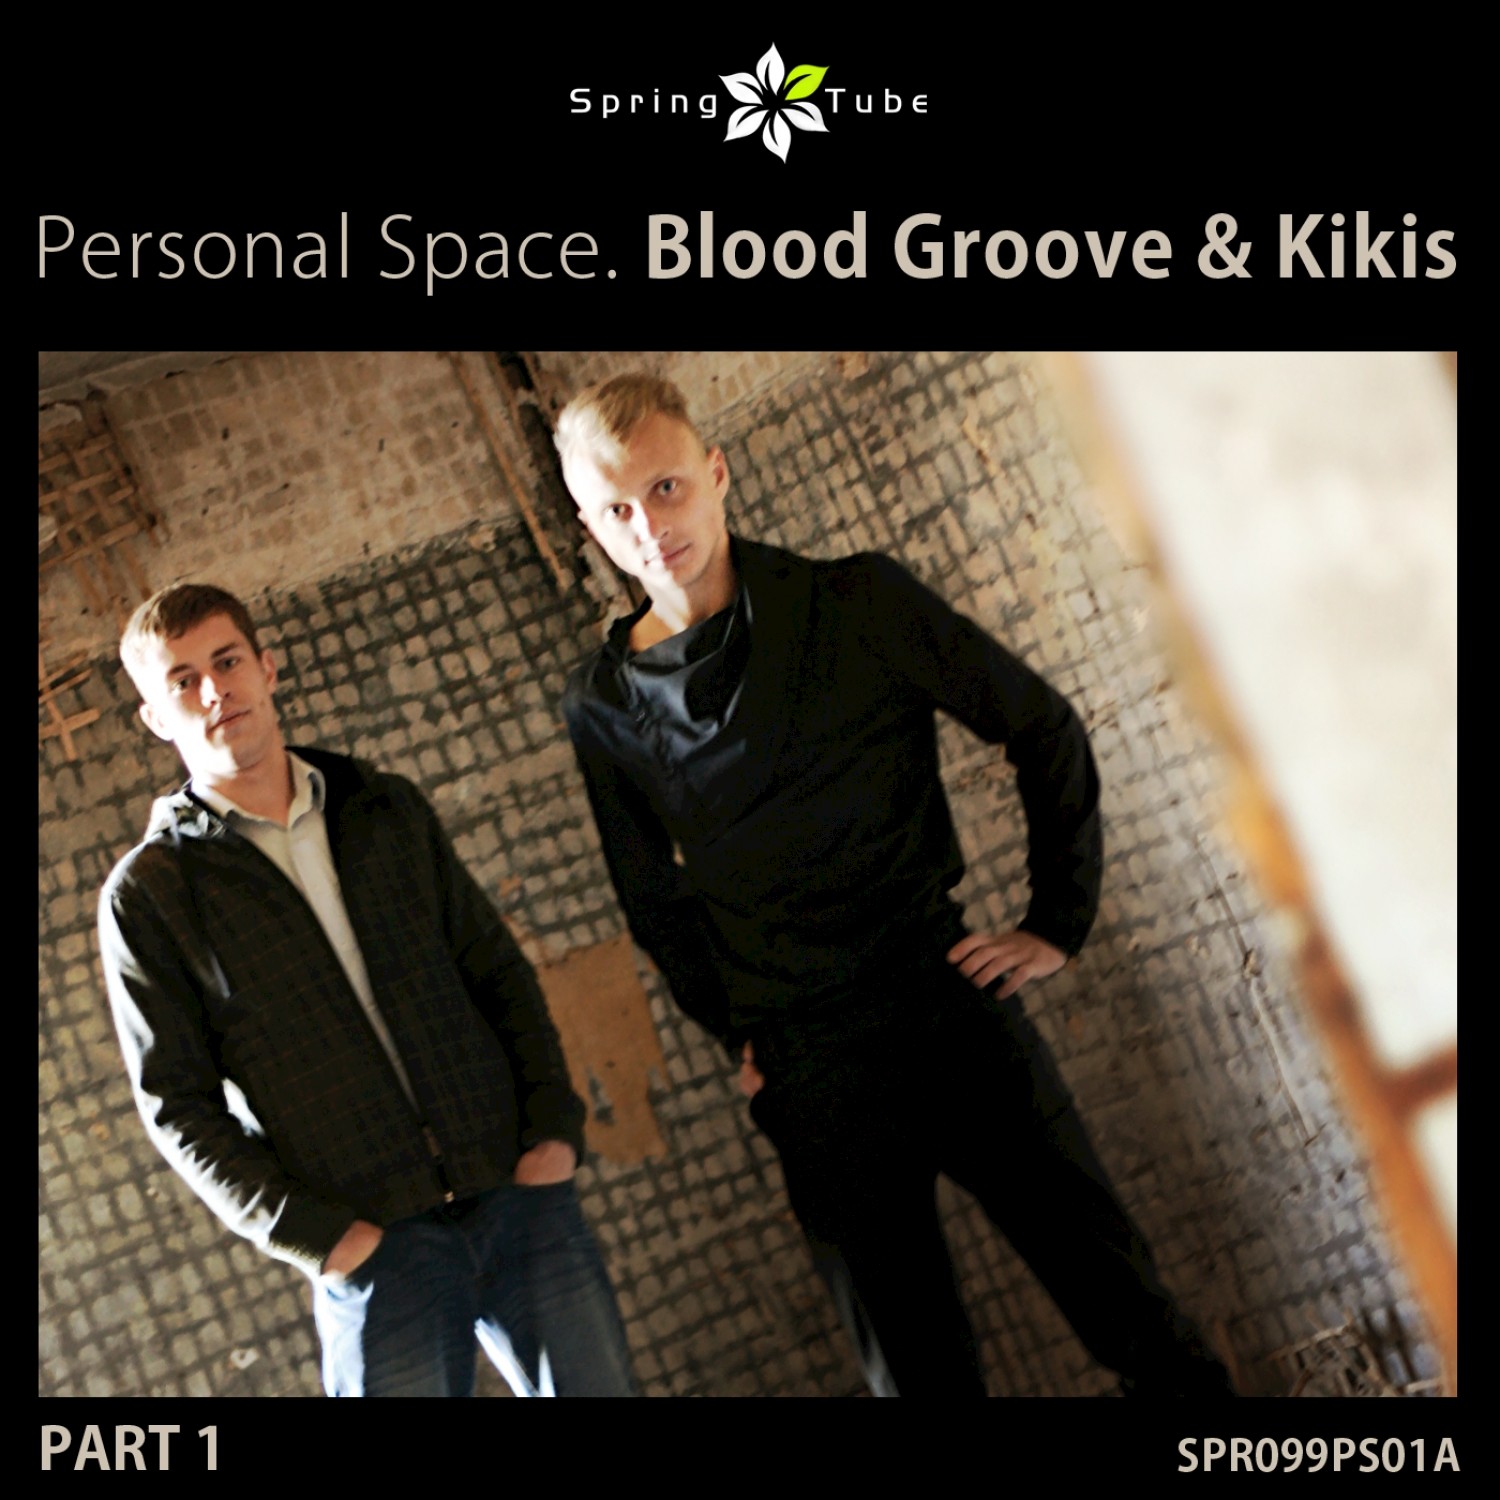 Personal Space. Blood Groove & Kikis, Pt. 1